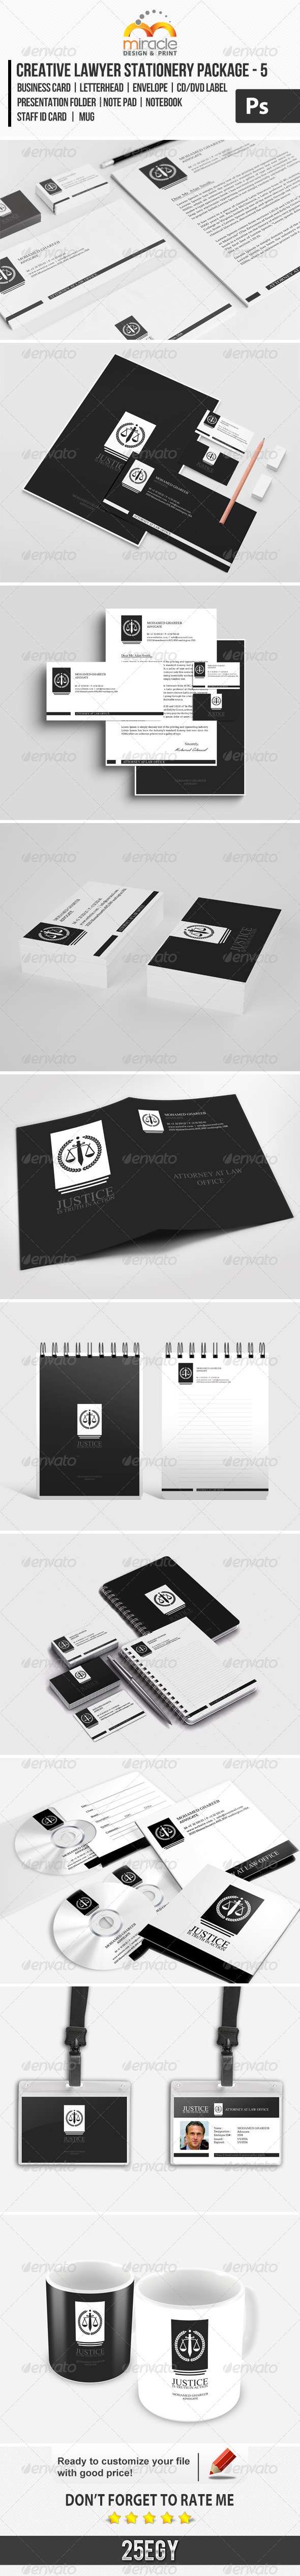 GraphicRiver Creative Lawyer Identity Package #5 7663079